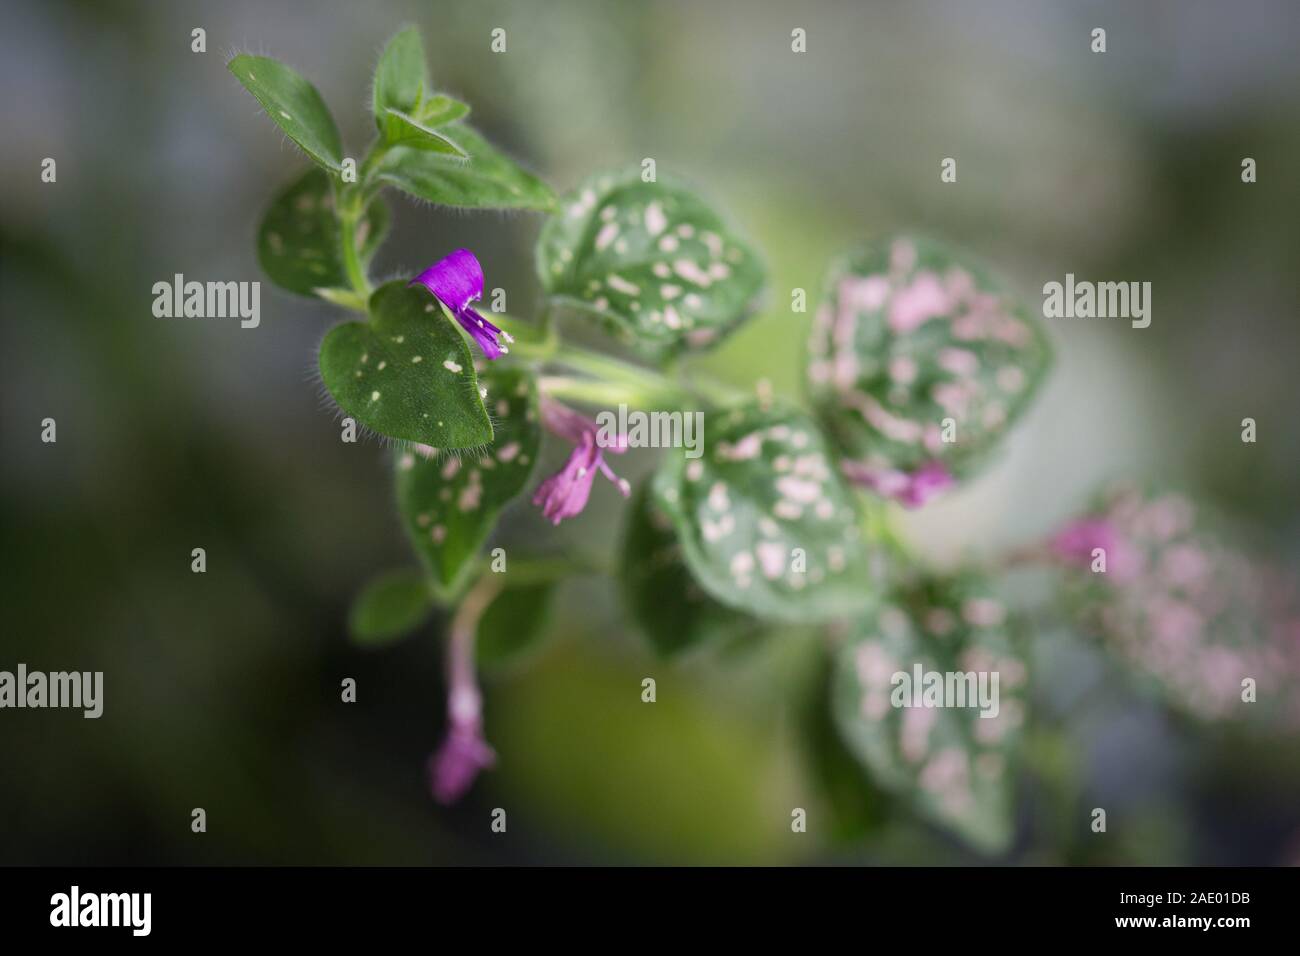 Close Up Of The Leaves And Flowers Of A Hypoestes Phyllostachya Pink Polka Dot Plant Stock Photo Alamy,High Efficiency Washer Vs Regular